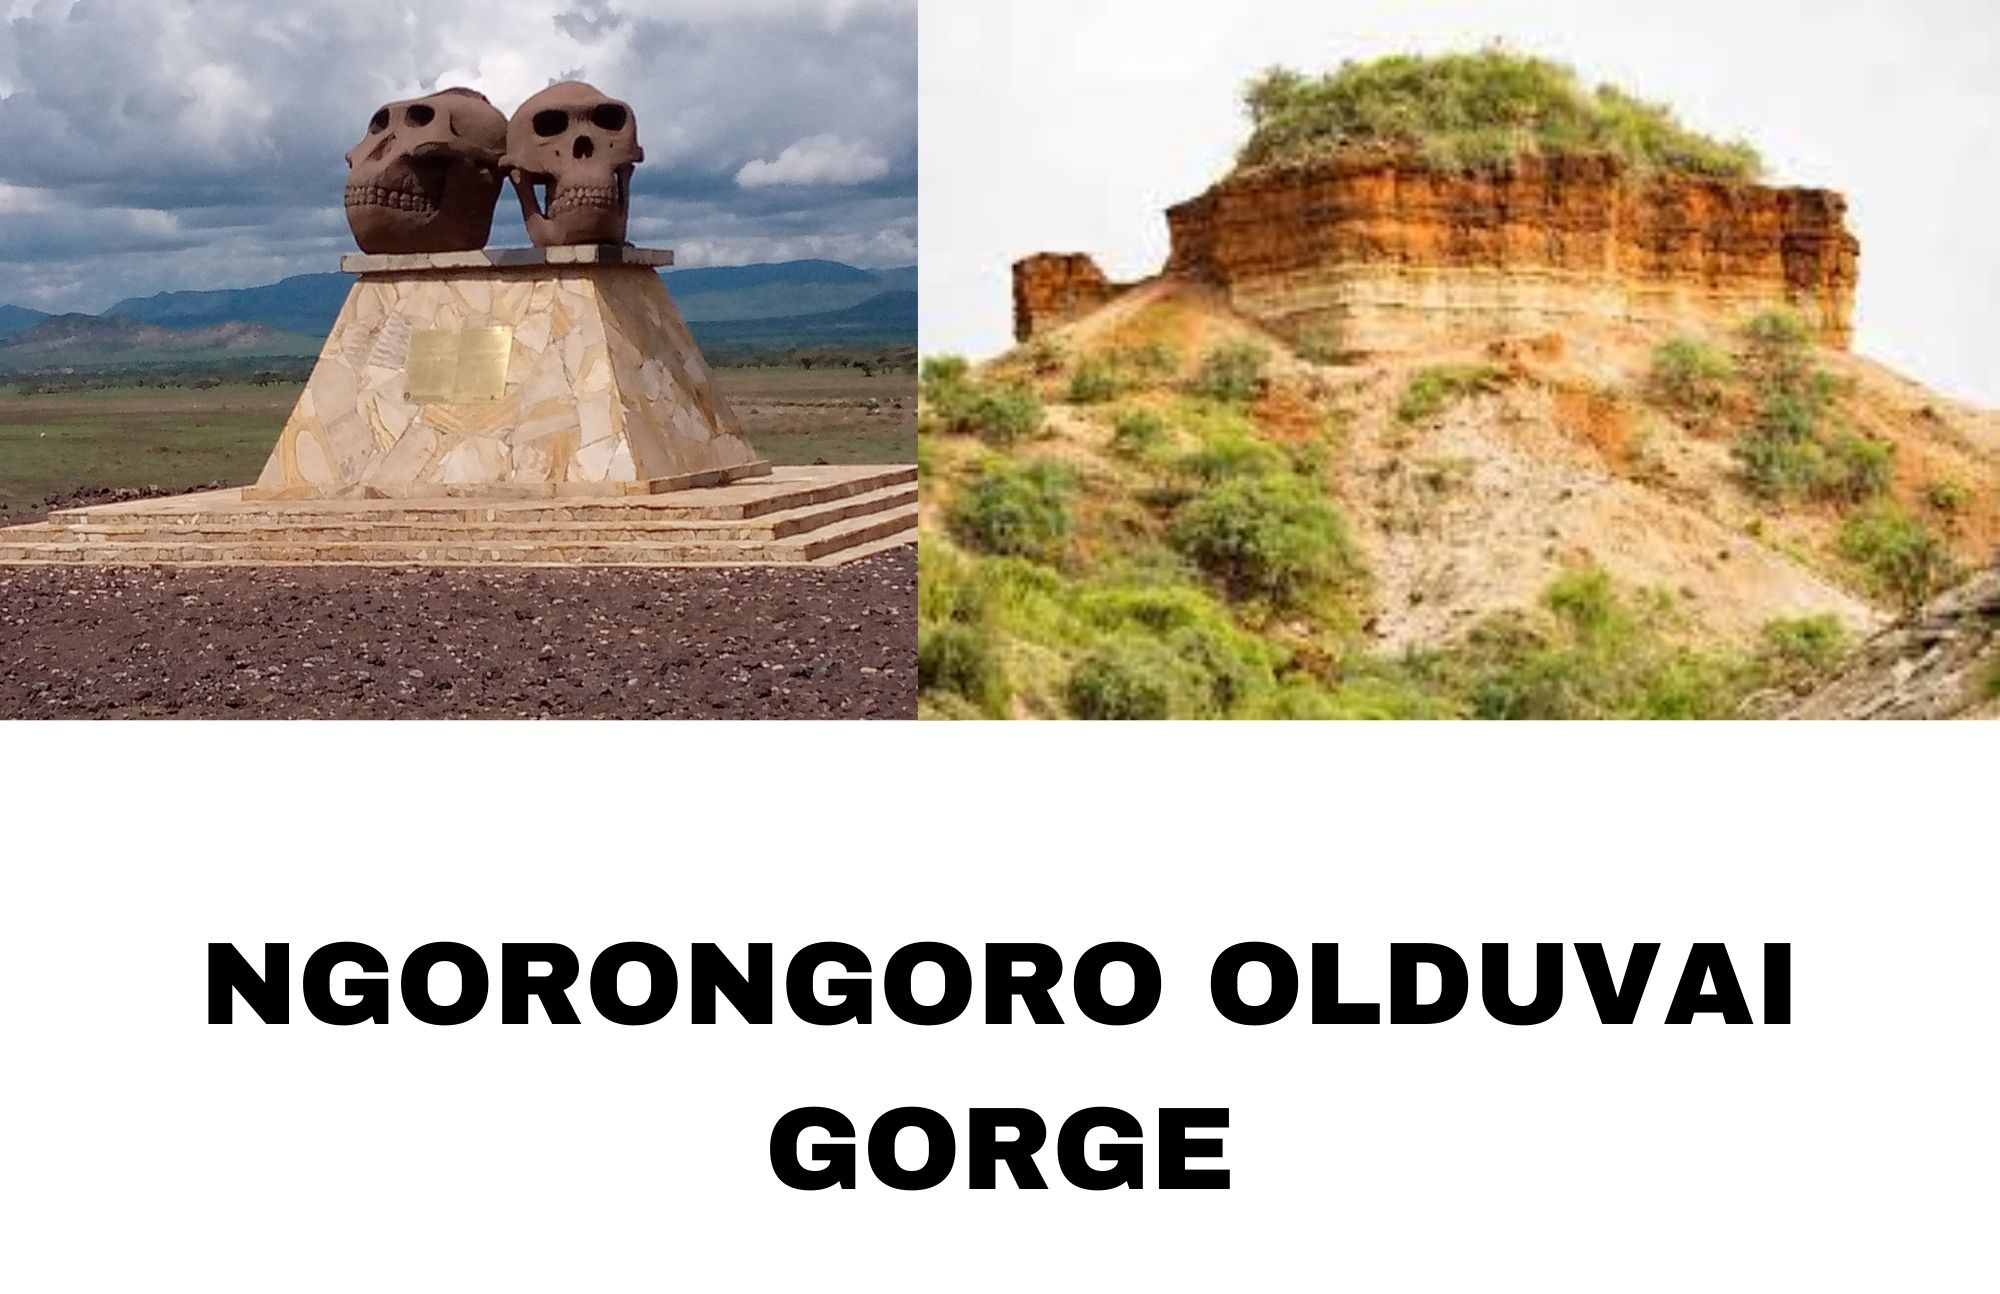 Olduvai Gorge replicas on the left and the real artifact on the right